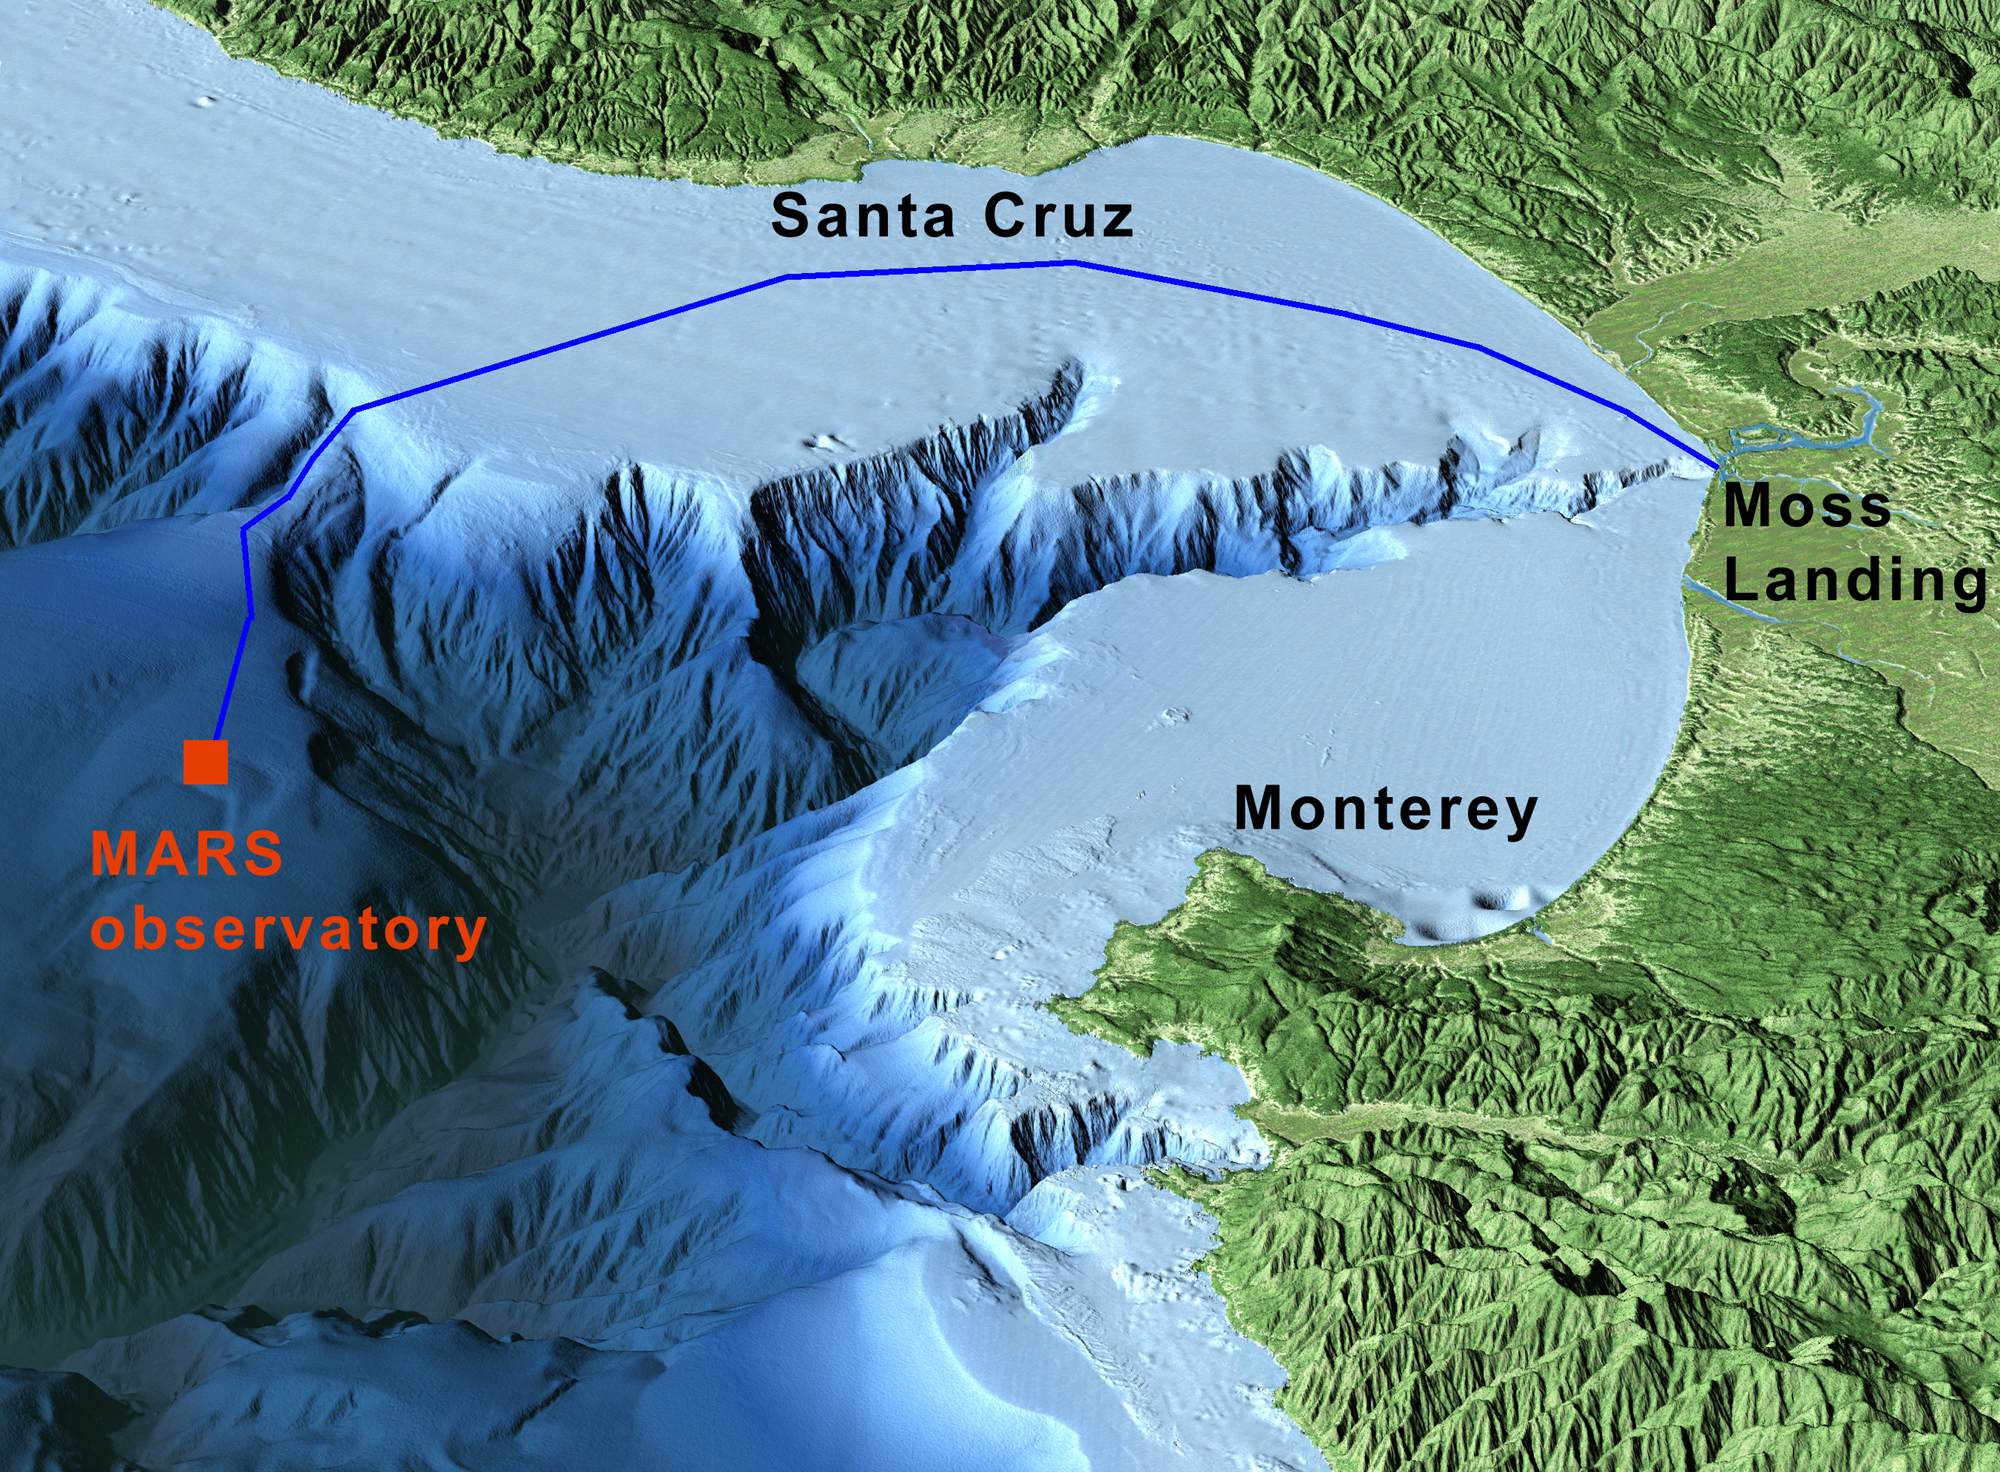 This computer-generated view of Monterey Bay shows the route of the MARS cable, which starts at the Monterey Bay Aquarium Research Institute in Moss Landing, California. The MARS observatory (red square) will be located on a sloping undersea plateau called 